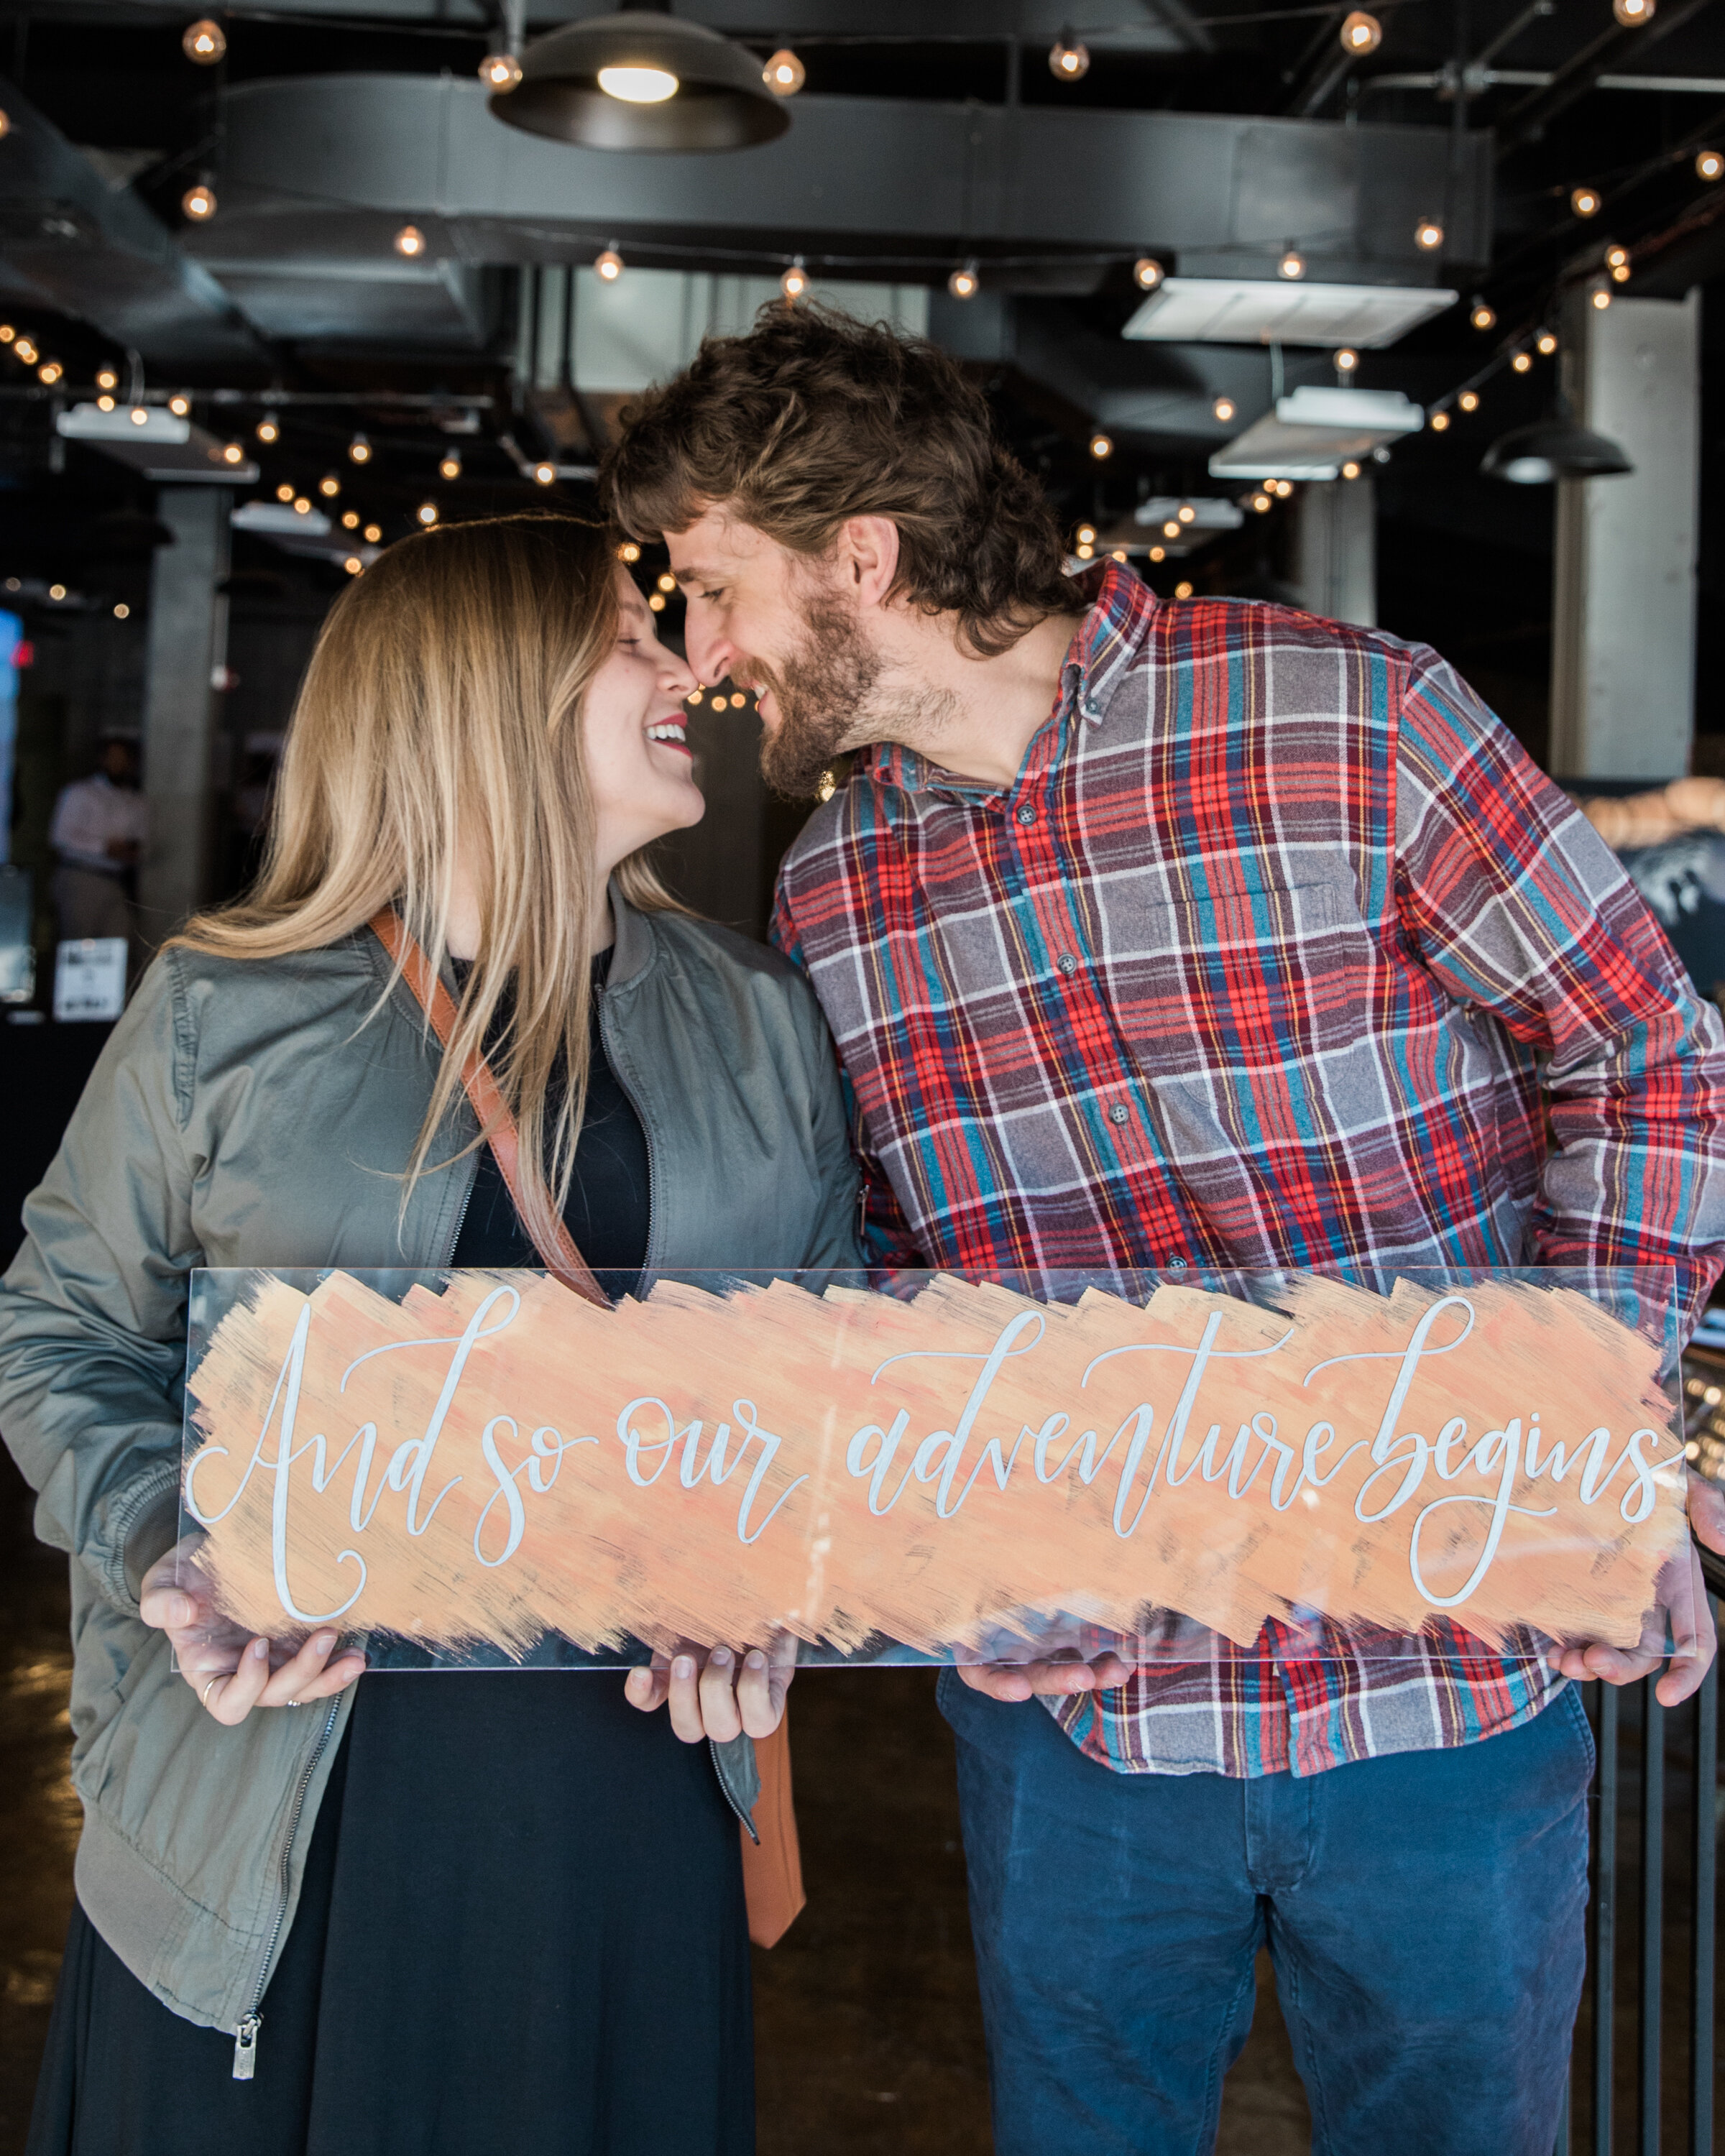 Custom Hand Lettered Signs for Engagement Photos by Signs of Our Lives shot by Megapixels Media Photography Best Baltimore Wedding Photographers Main Street Ballroom-9.jpg